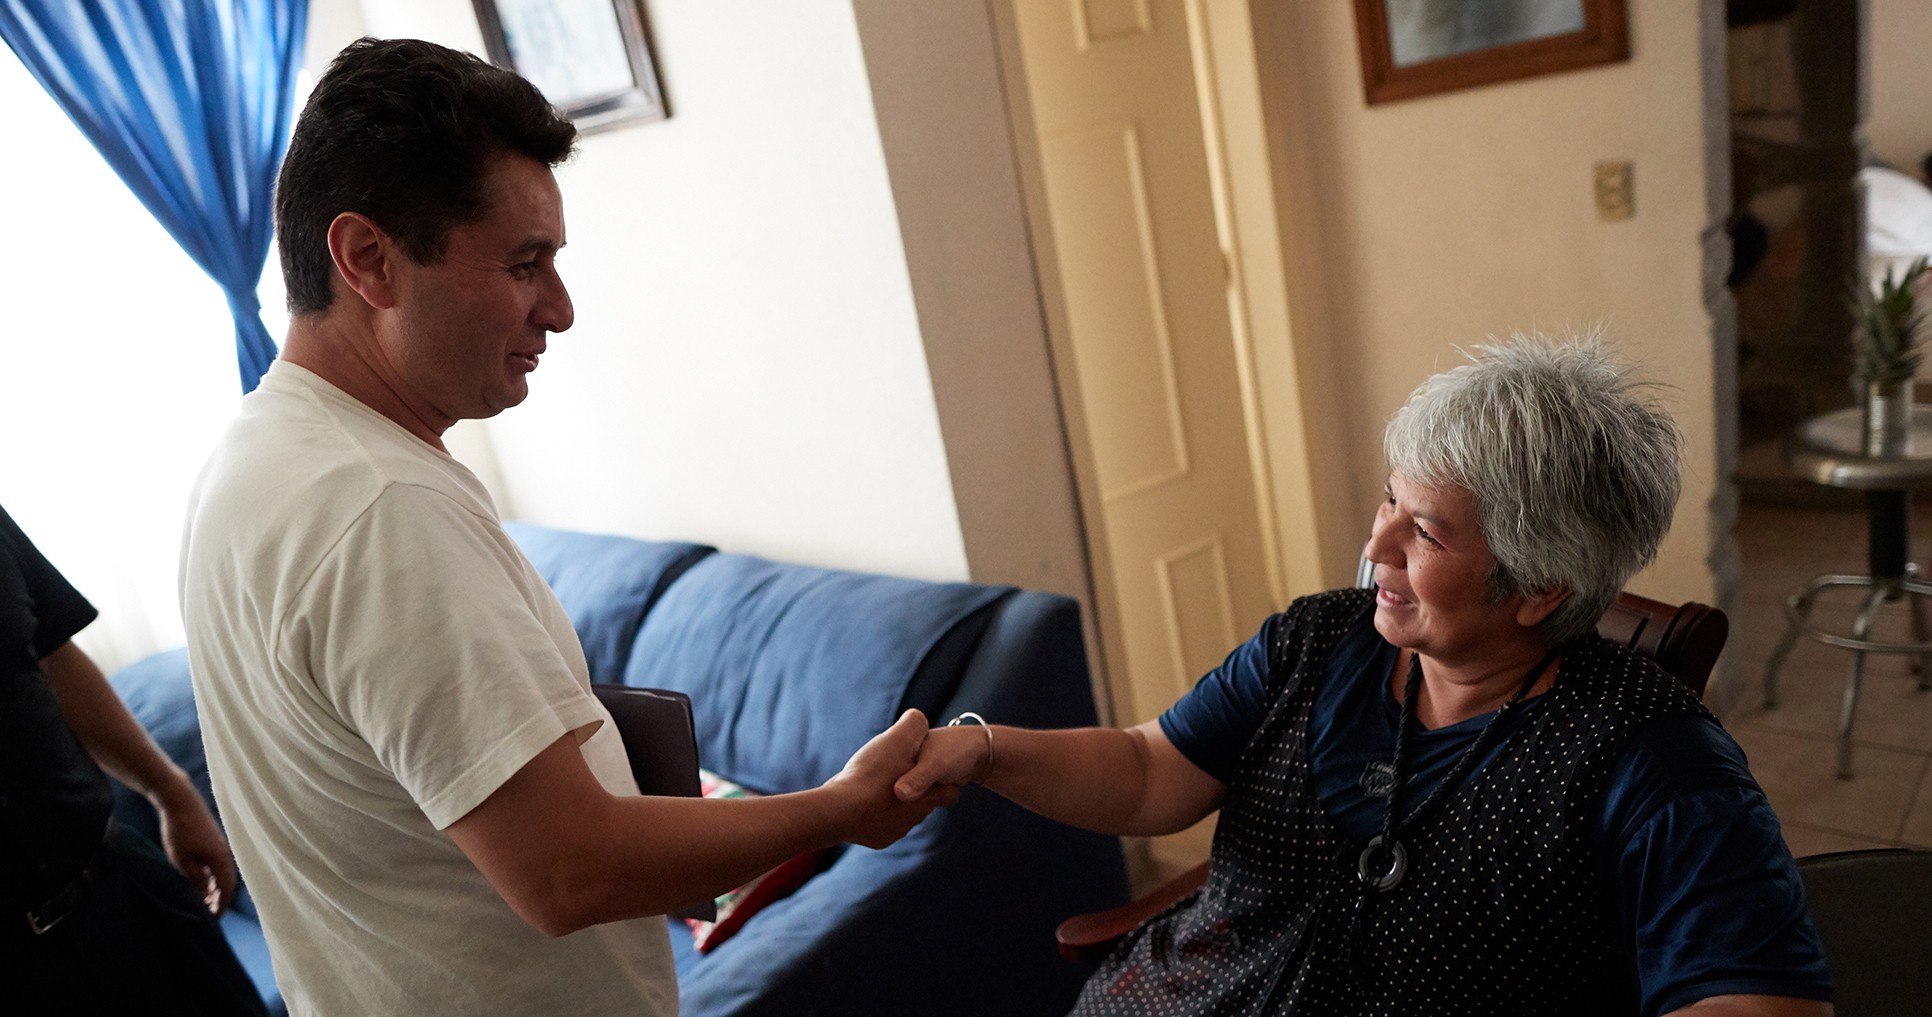 A man shakes the hand of an elderly woman after a ministering visit.